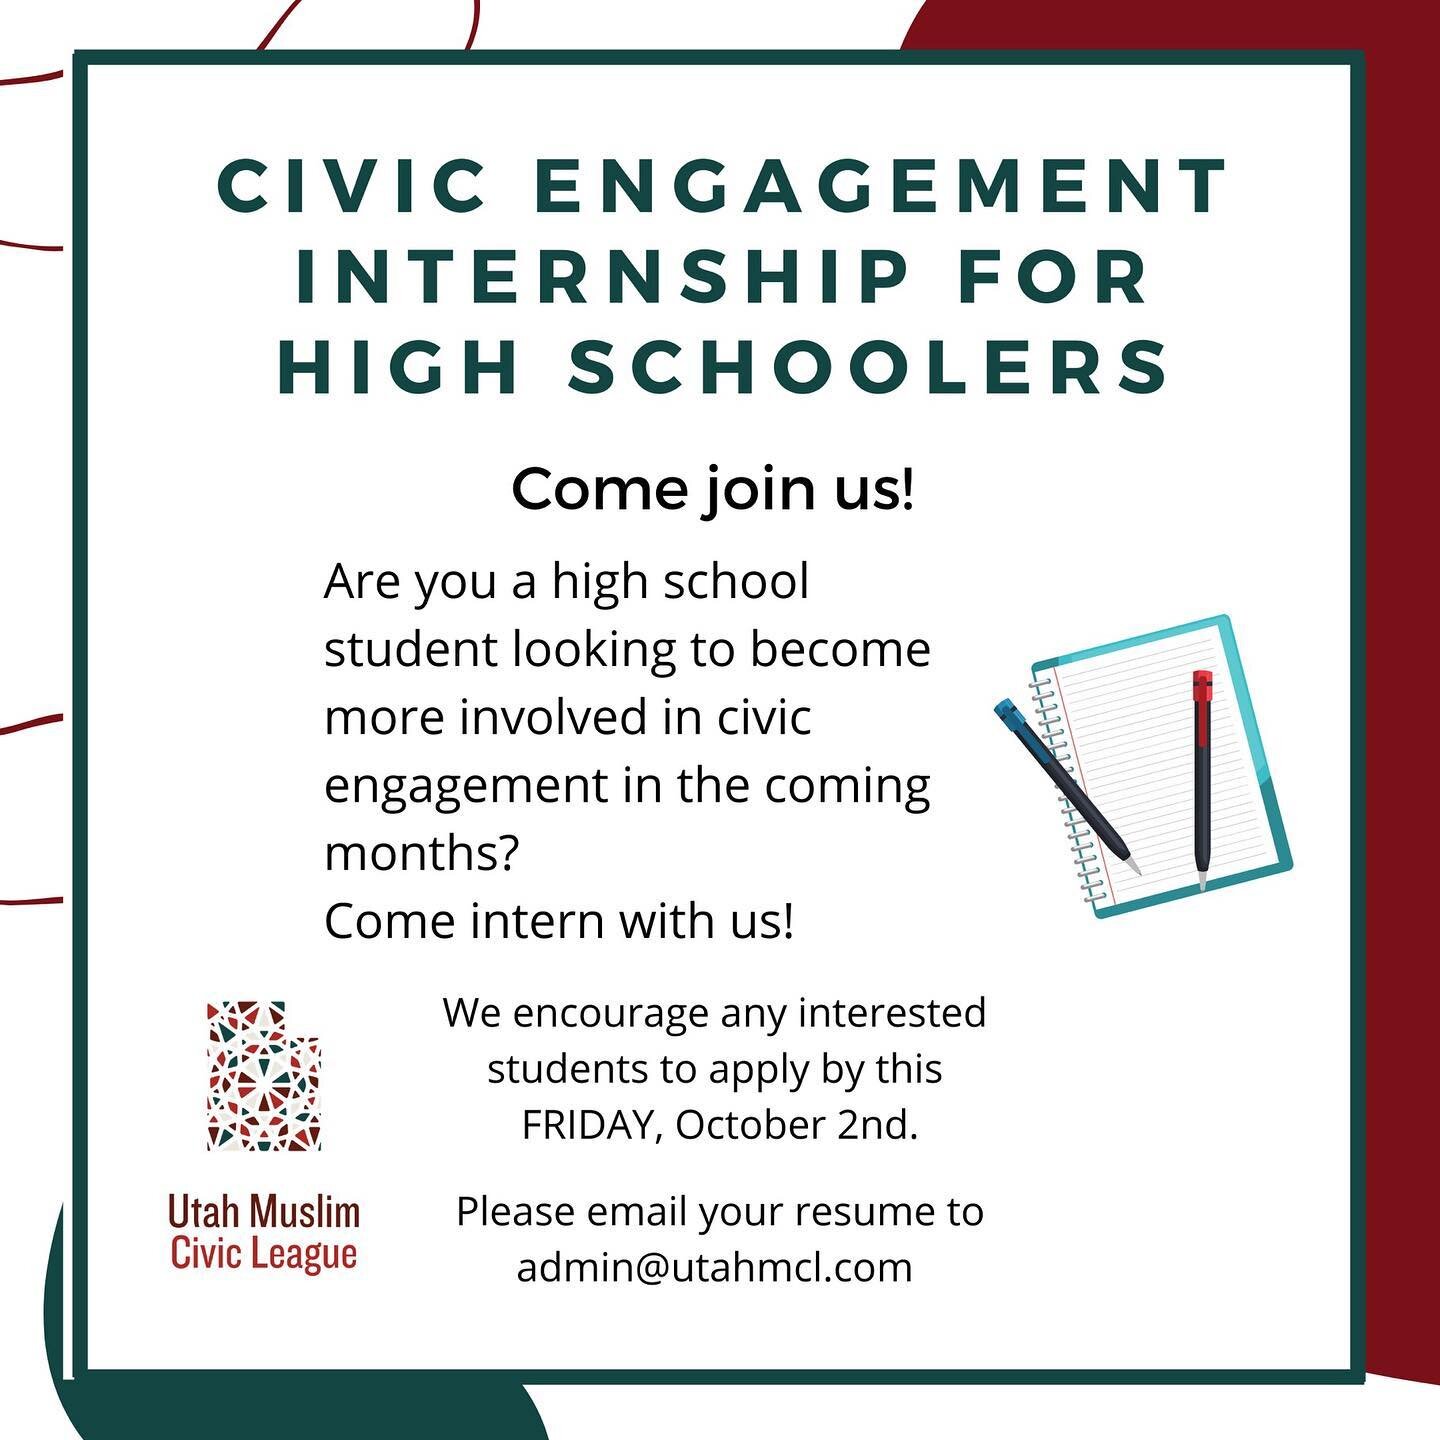 Calling all high school students who want to be more involved in civic engagement. Come intern with us! 

The Utah Muslim Civic League is looking for high school students for our civic engagement internship to help with increasing civic engagement in